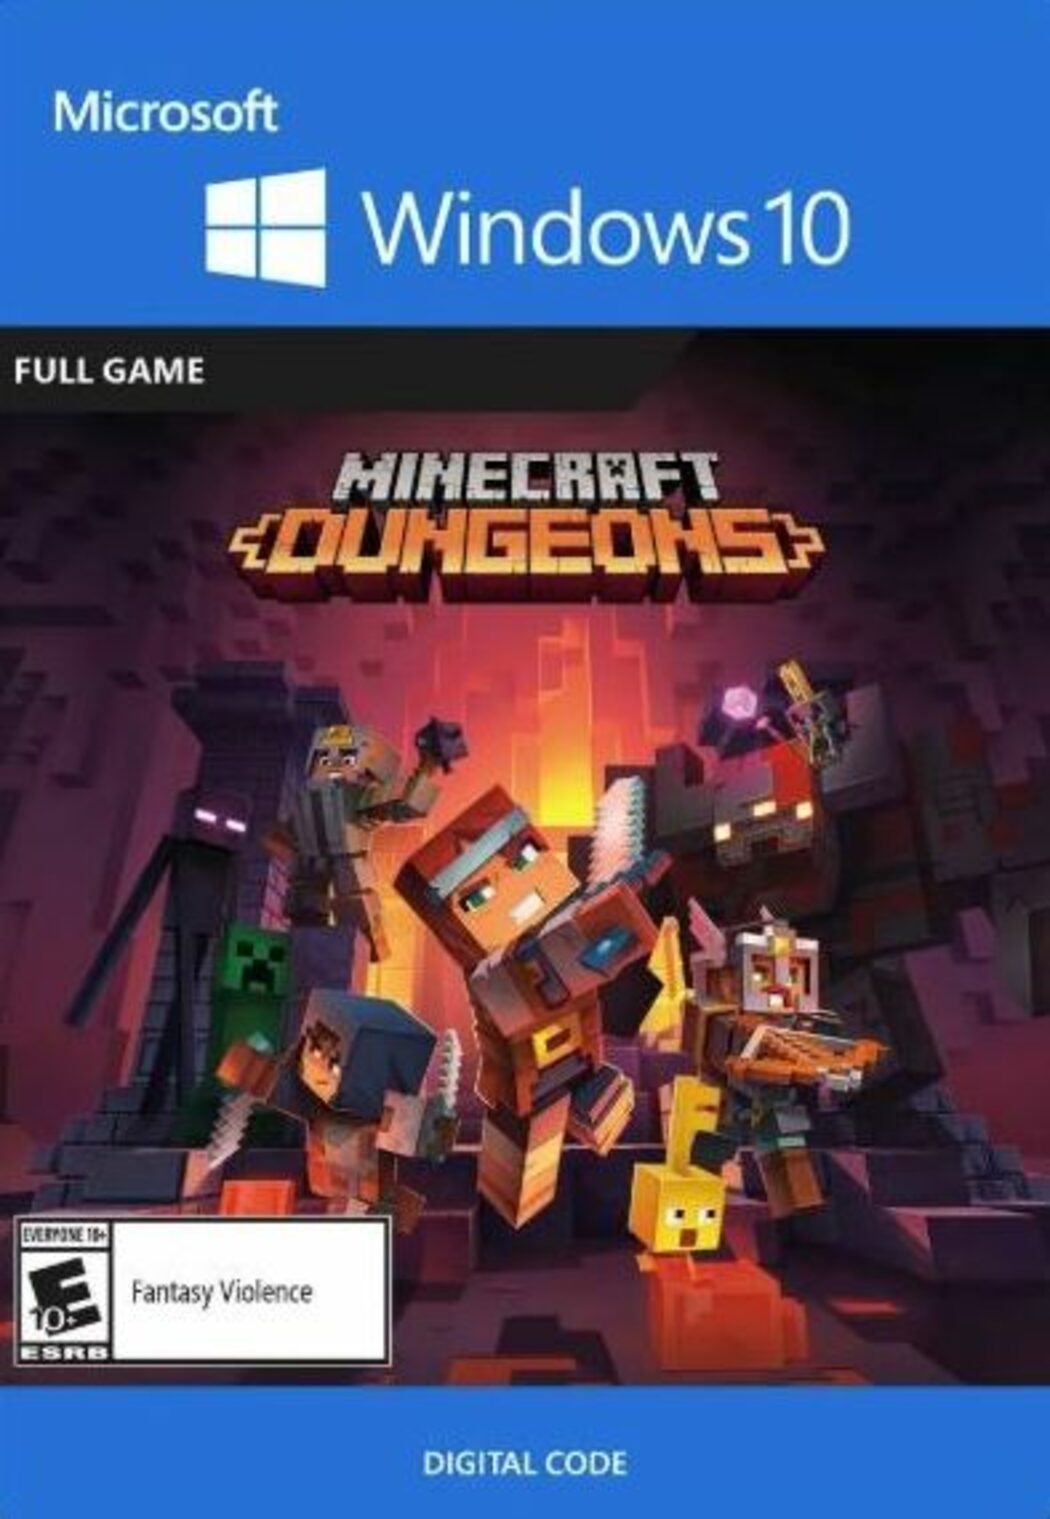 microsoft gift card for minecraft